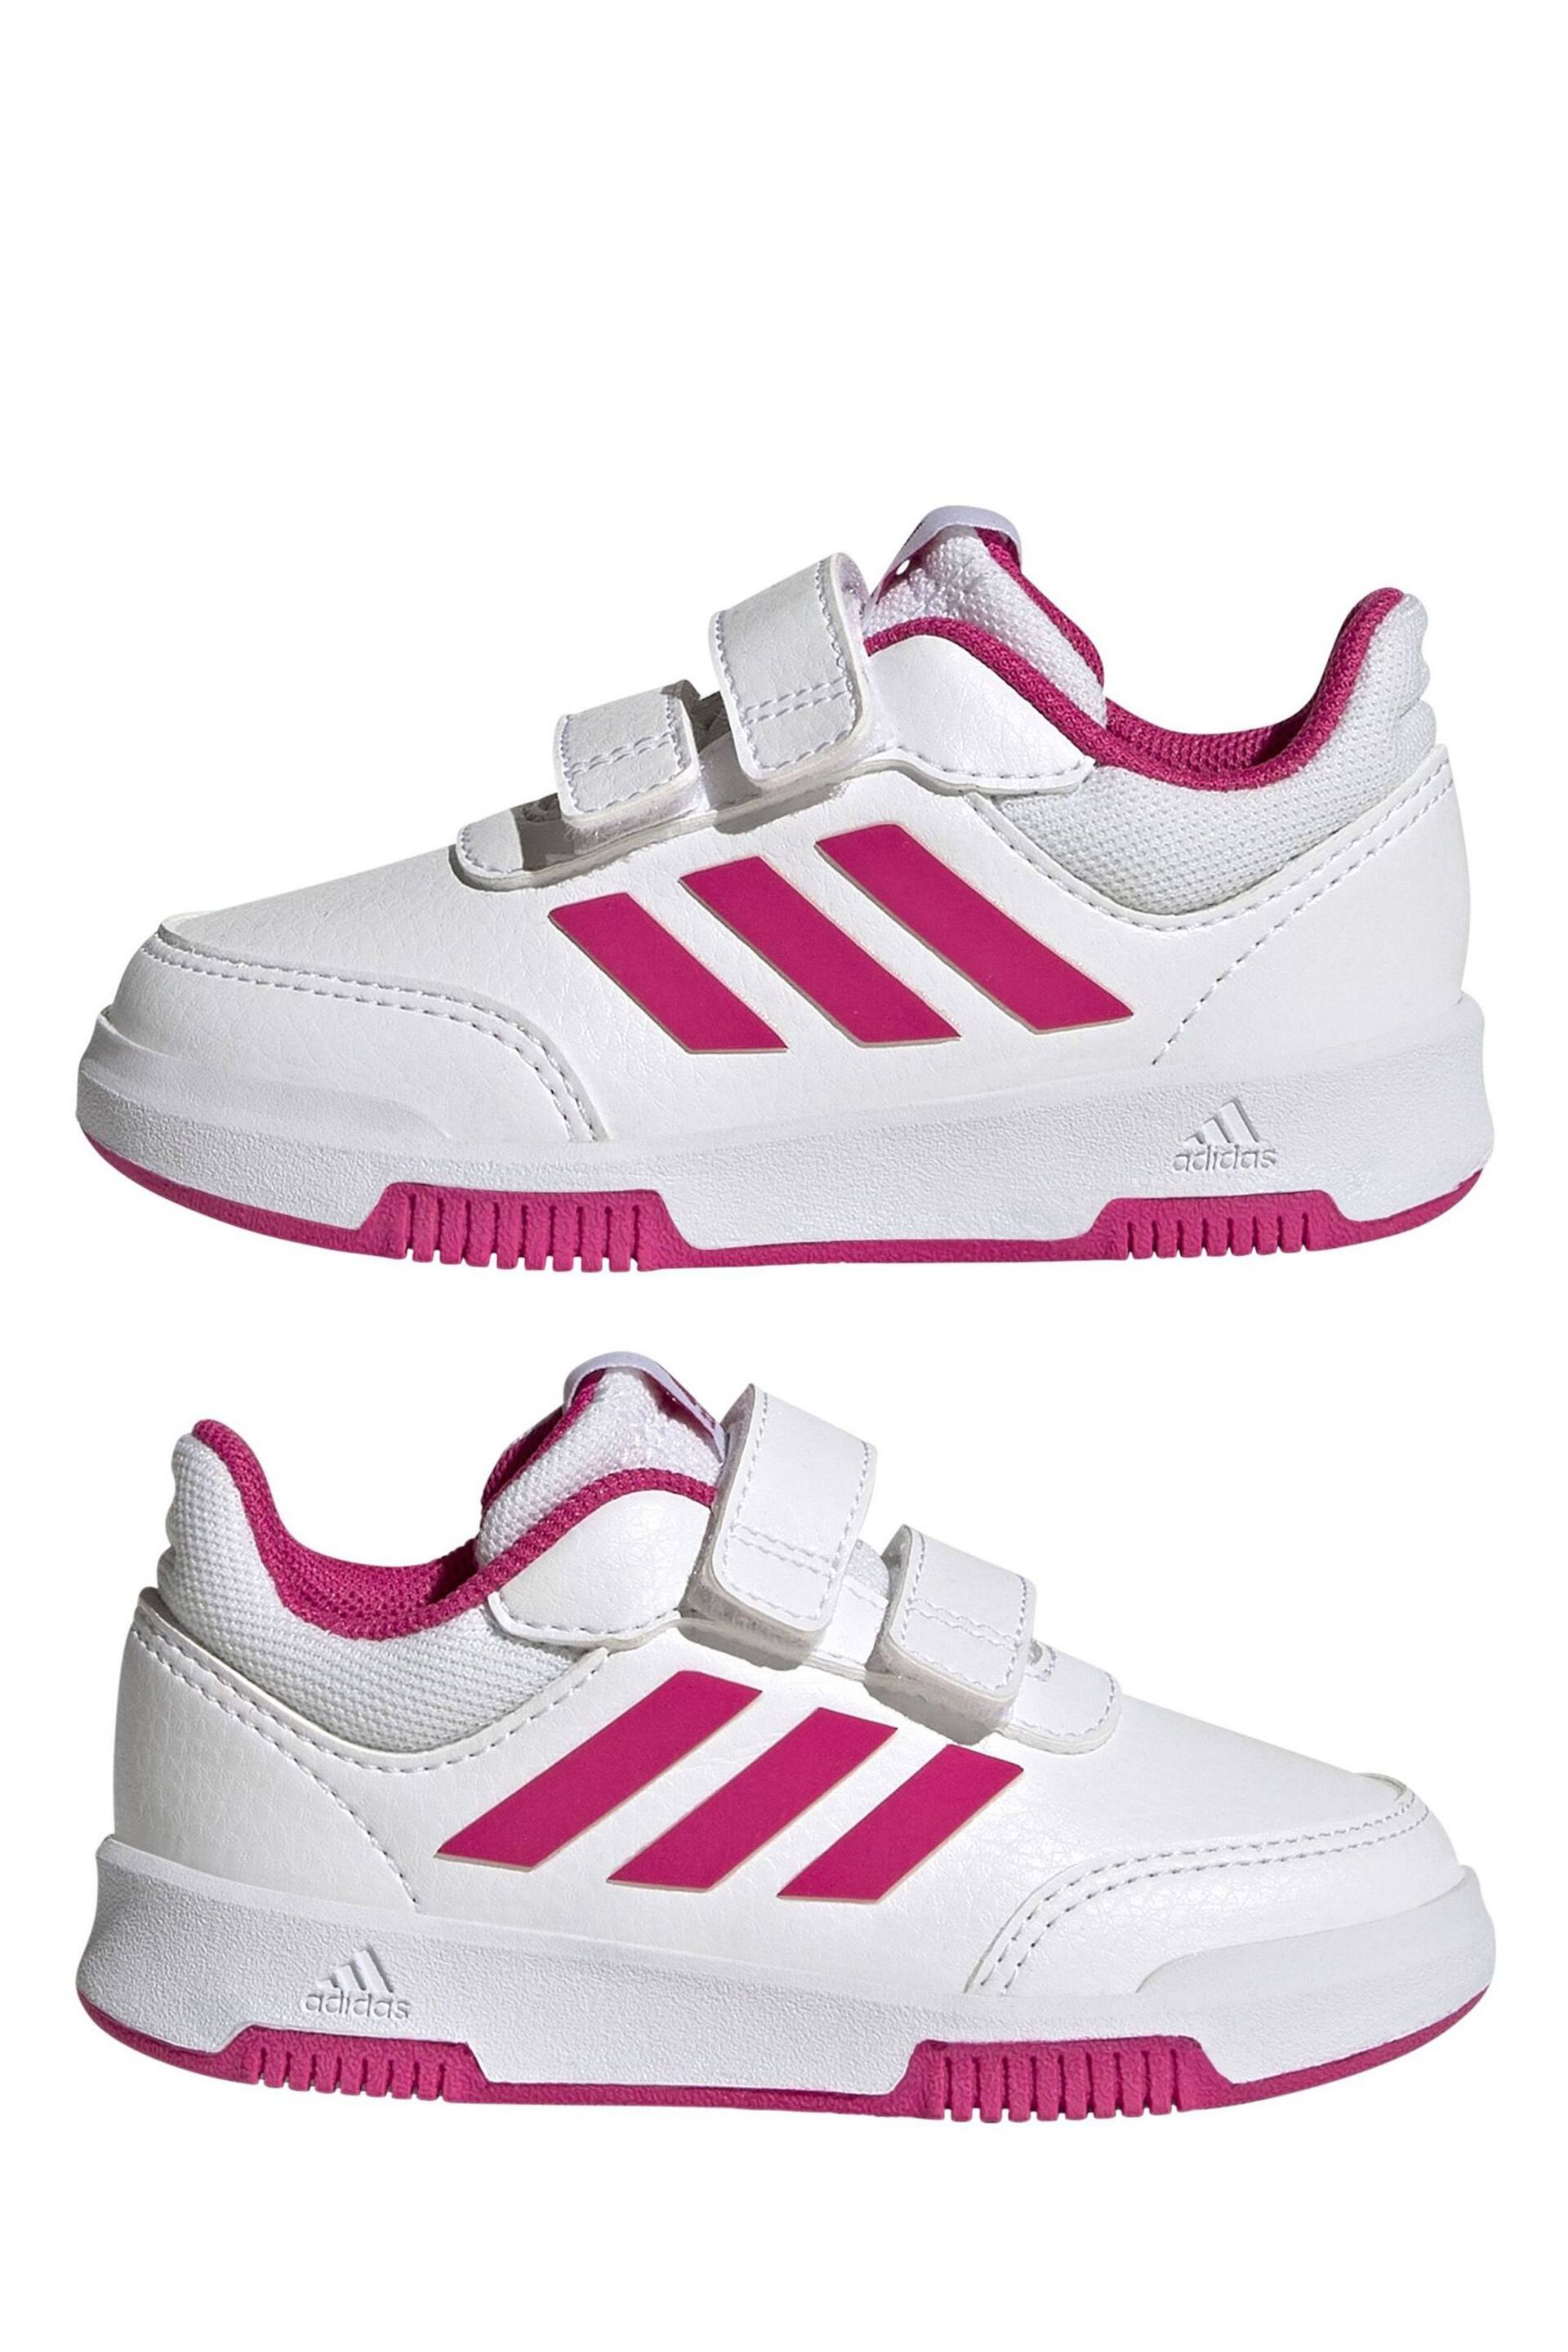 adidas White/Pink Tensaur Hook and Loop Shoes - Image 5 of 9